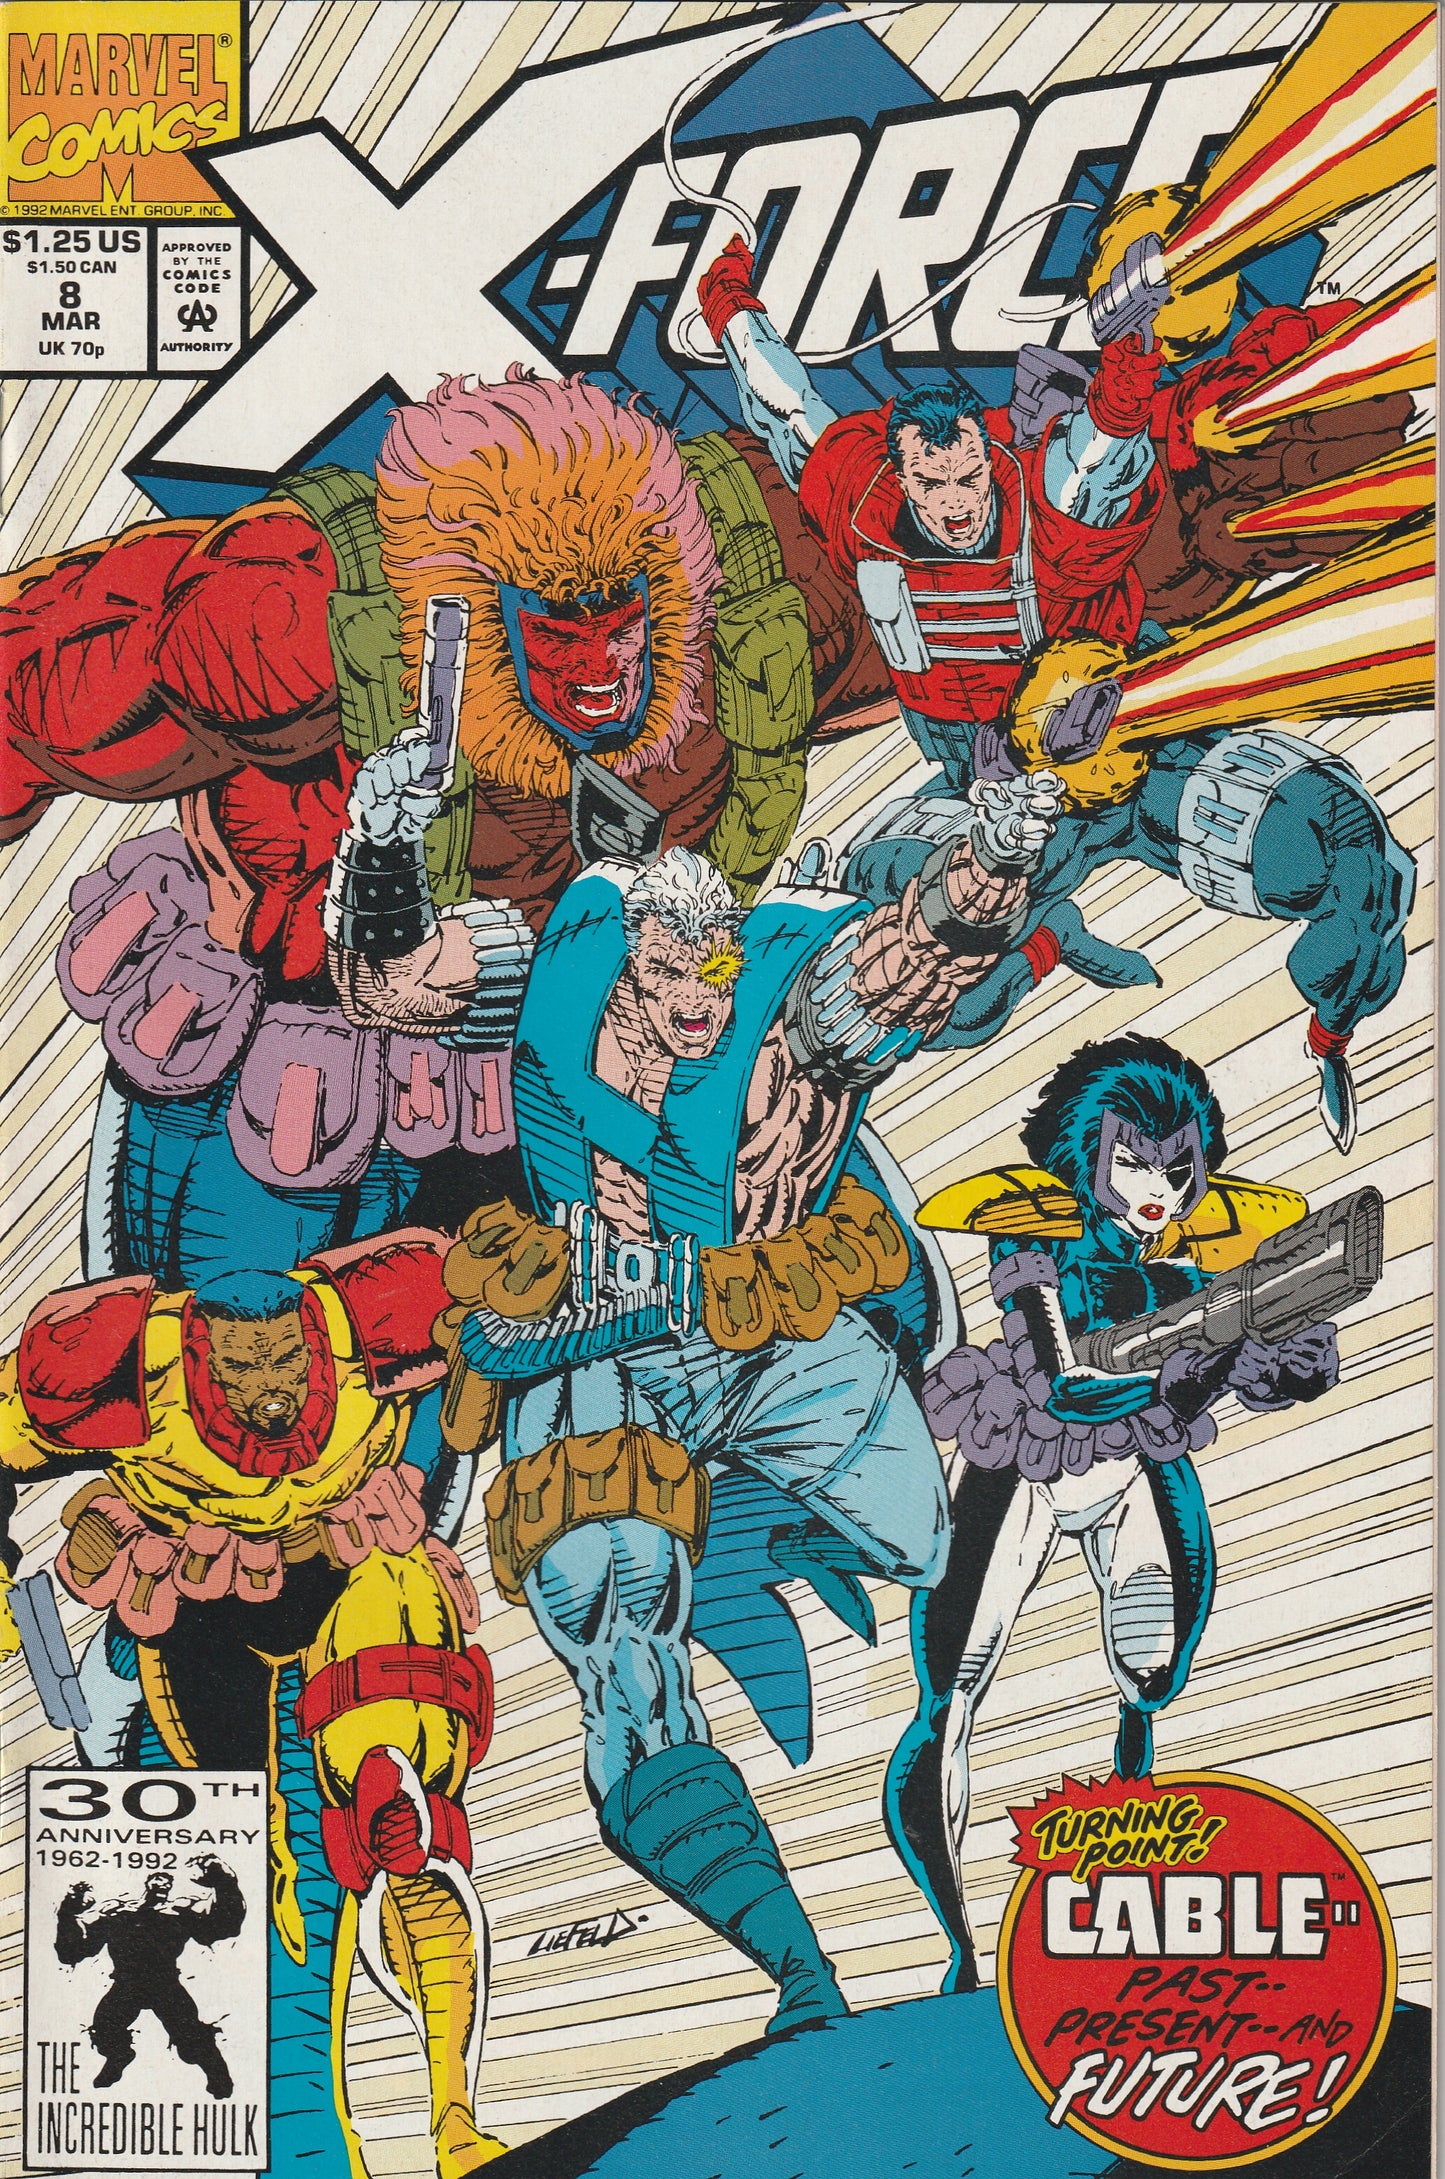 X-Force #8 (1992) - 1st Appearance of Domino, Origin of Cable